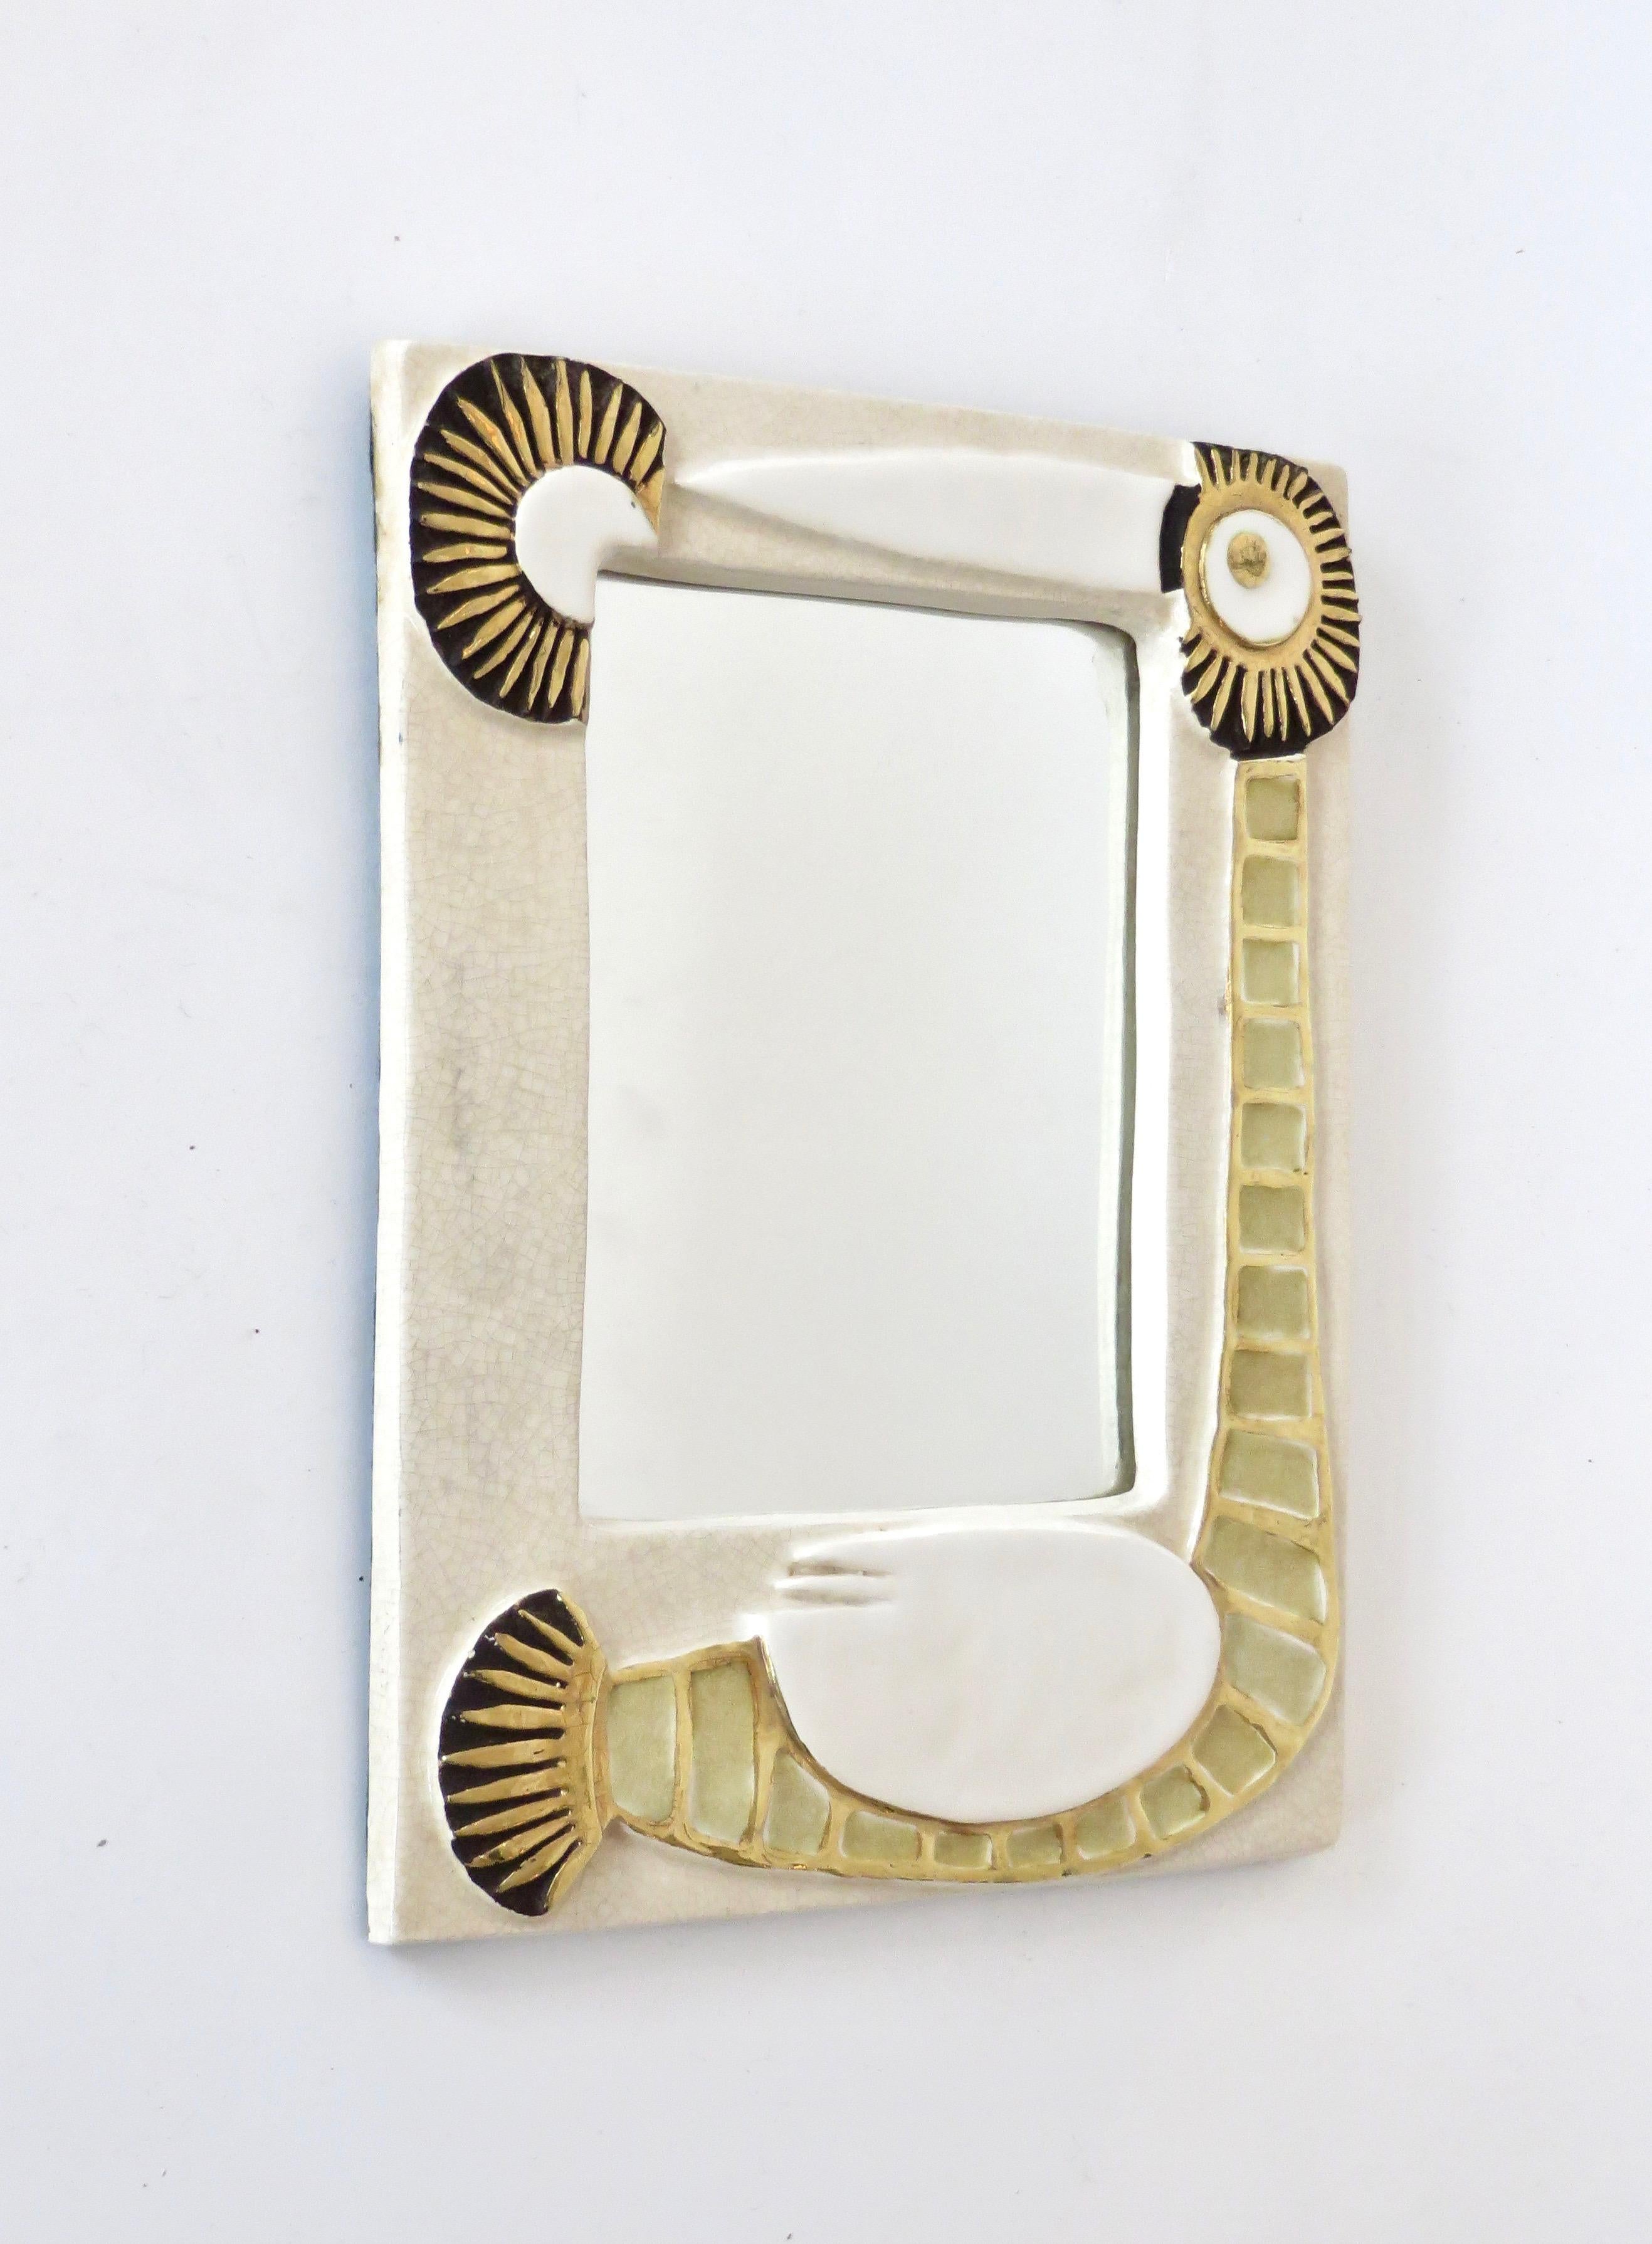 A French ceramic mirror by Mithé Espelt with stylized bird motifs in gold and cream glaze,
France, 1970s. In very good original condition with felt backing.
